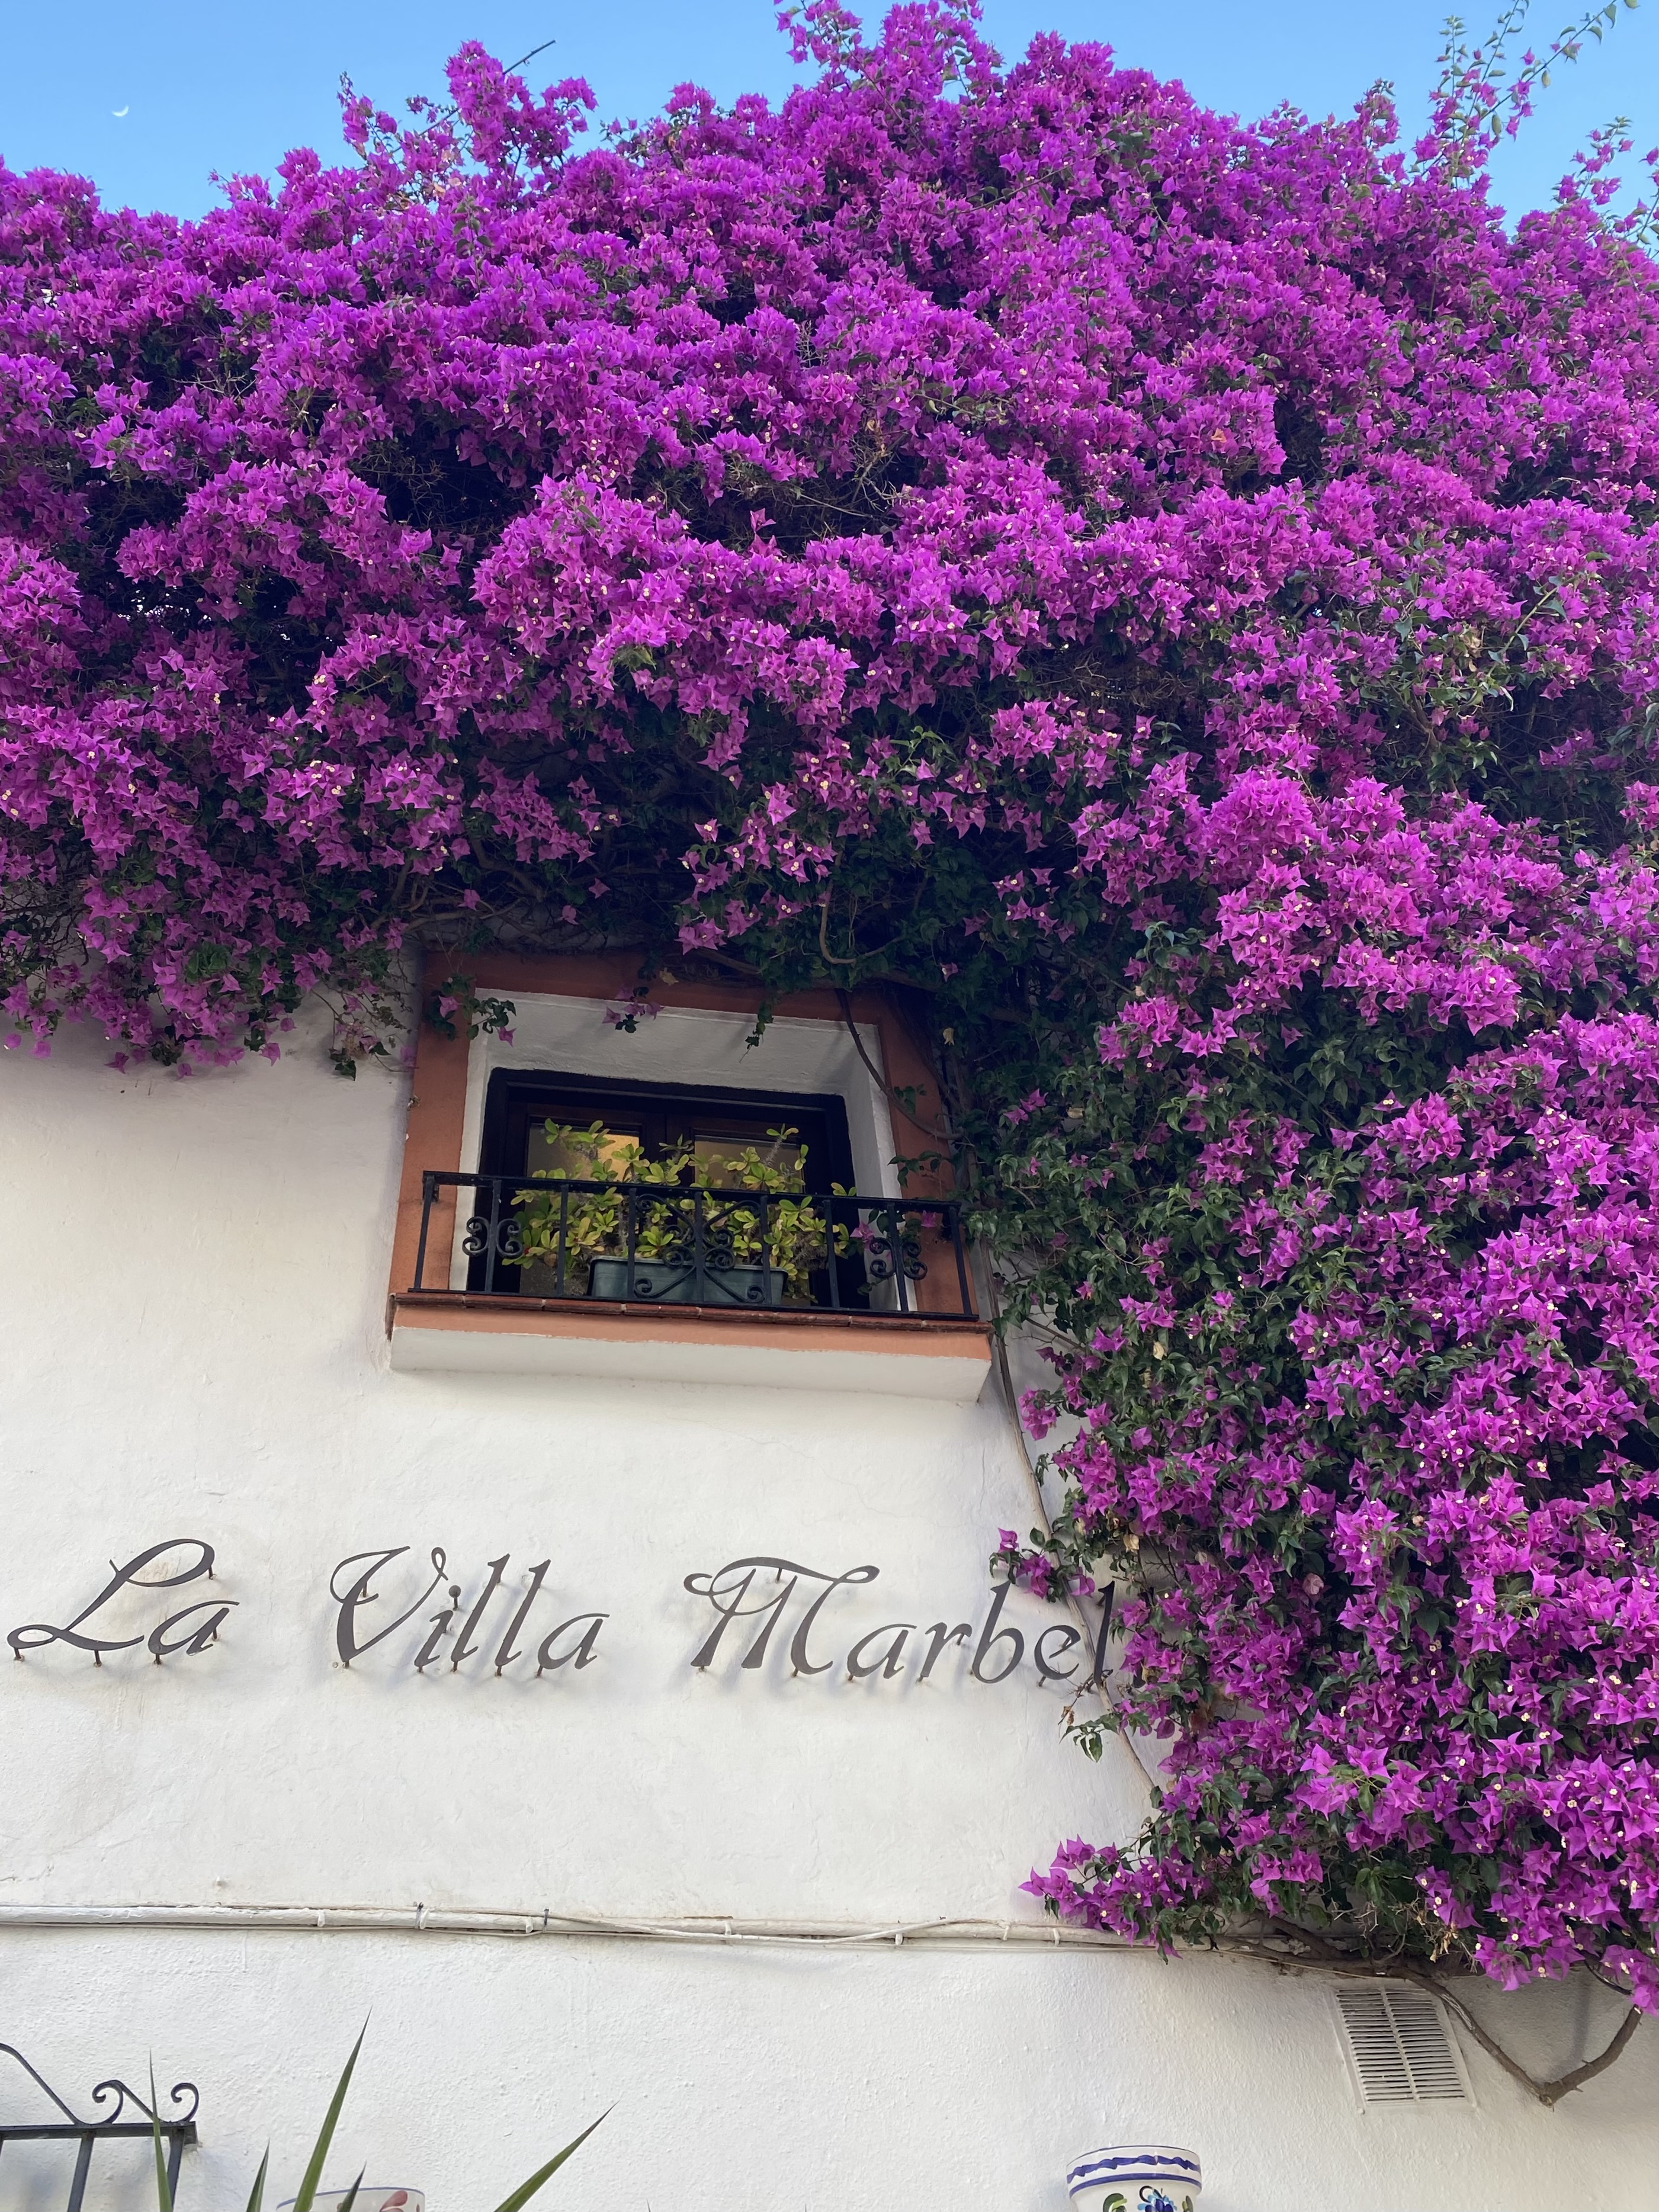 White wall with a sign saying La Villa Marbella and partially covered in purple flowers